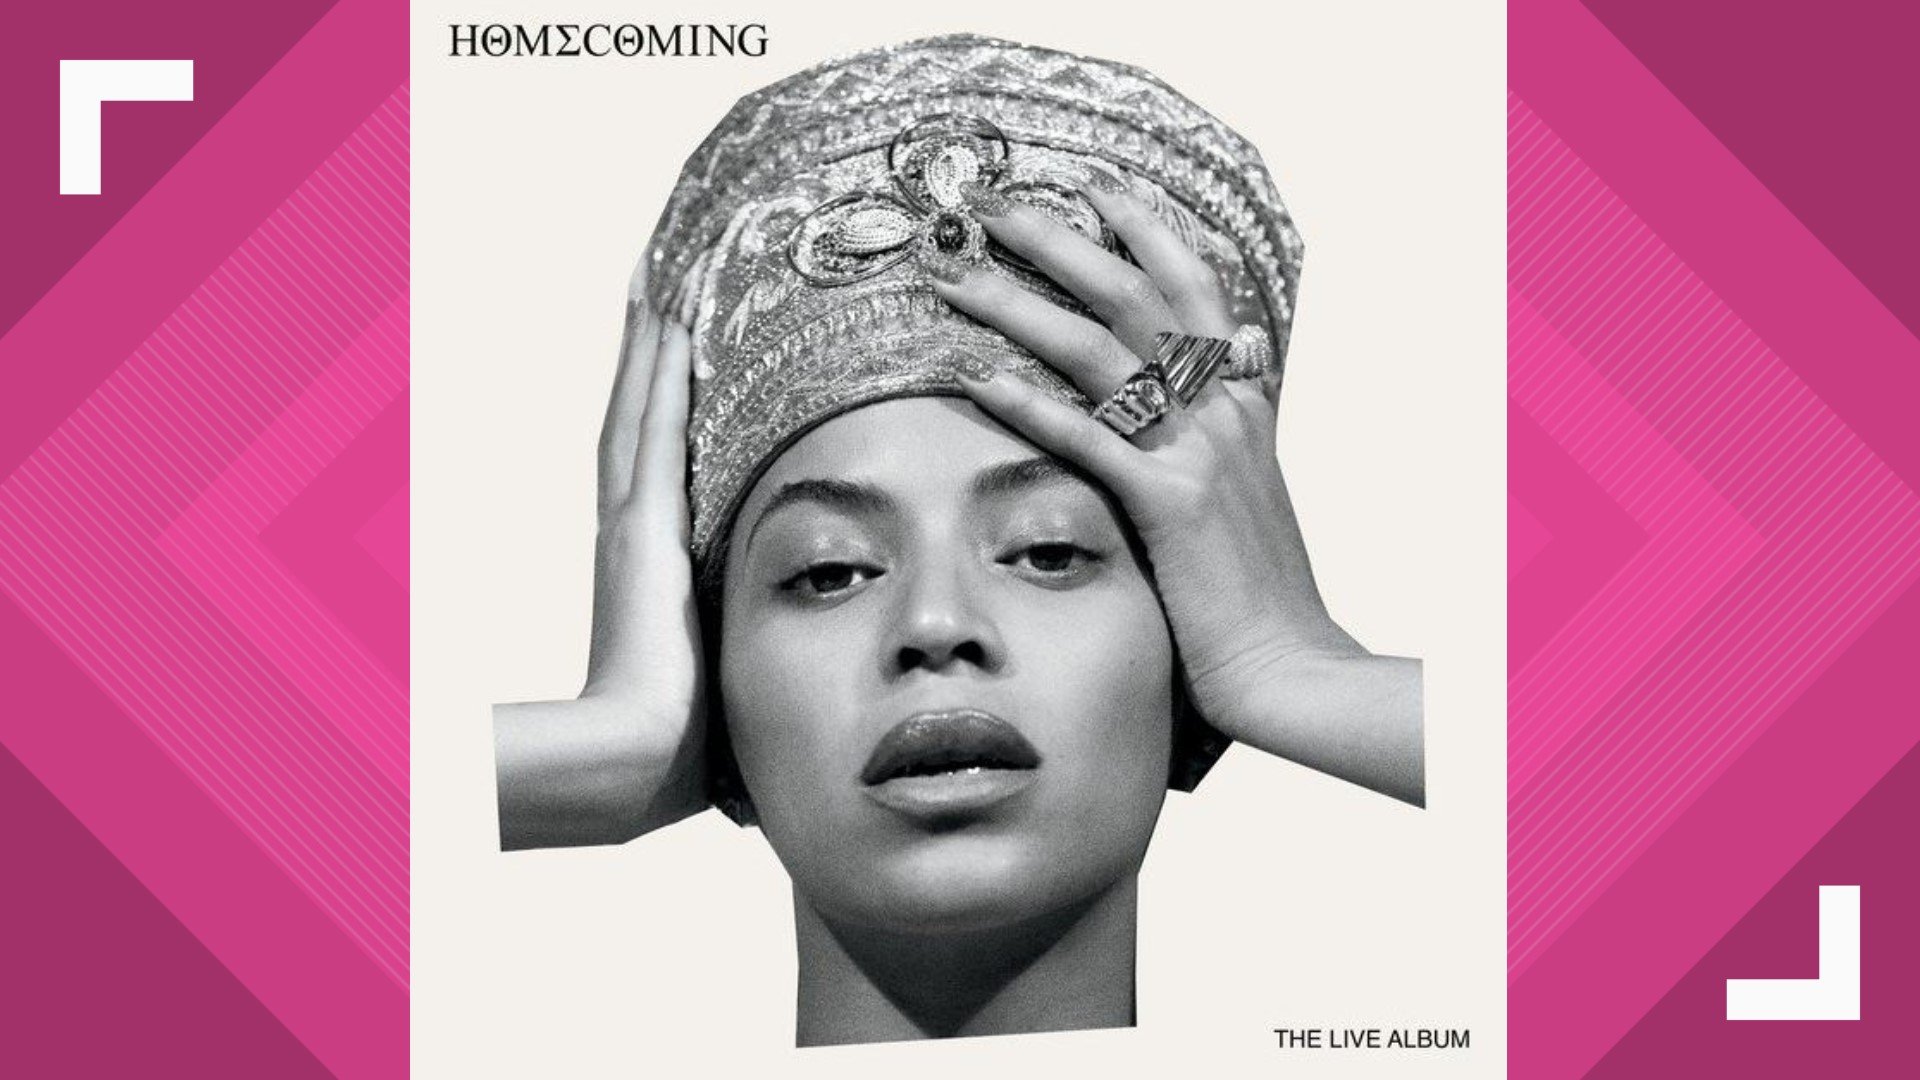 Beyoncé surprised fans Wednesday morning with a 40-track live album that coincides with her 'Homecoming' special on Netflix. All this and more trends on the web.